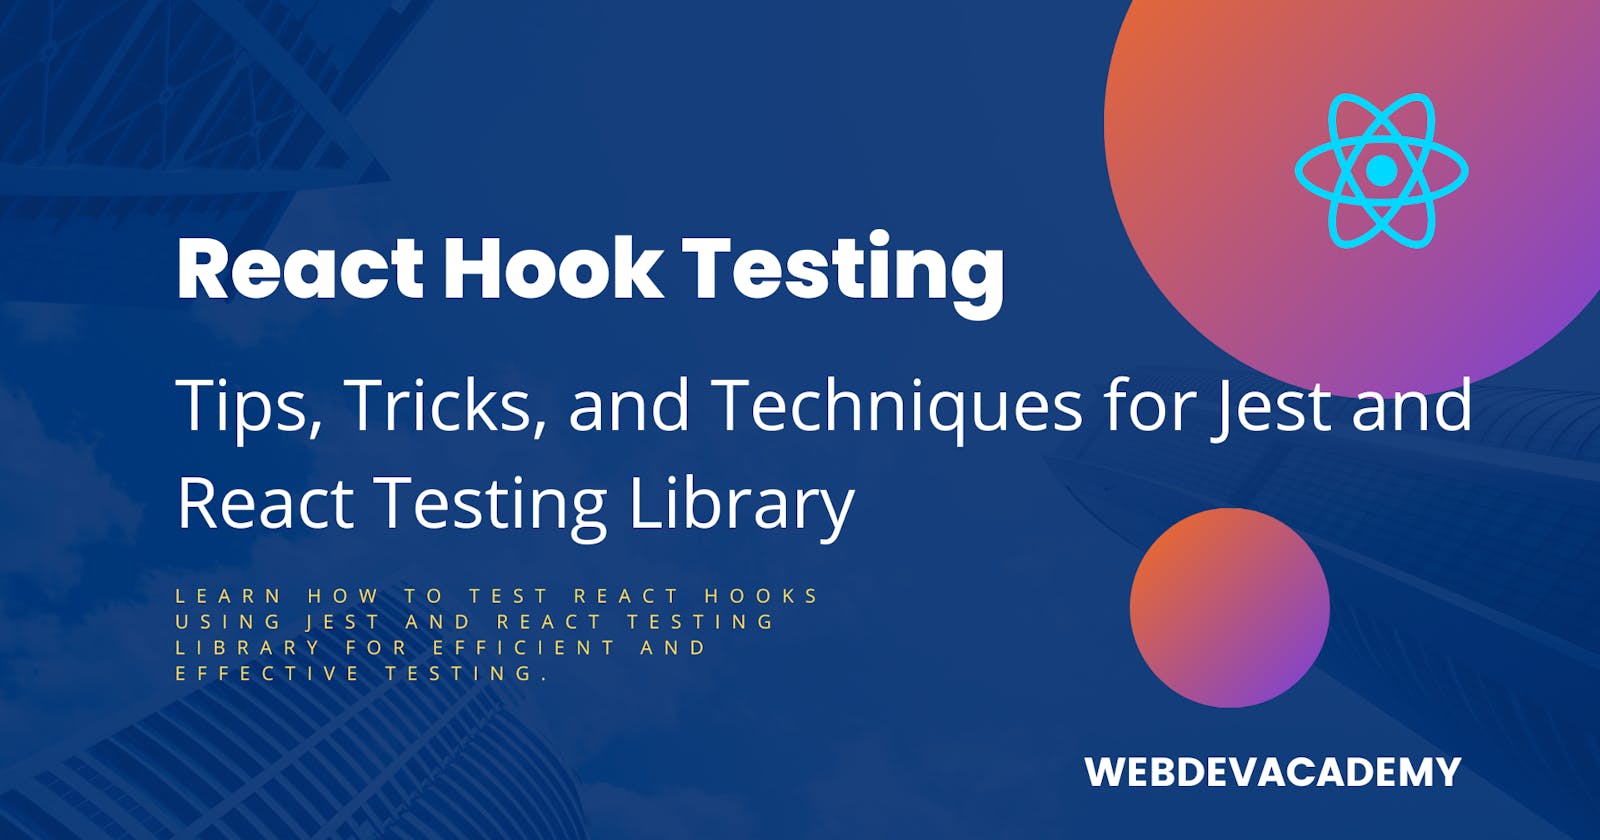 React Hook Testing: Tips, Tricks, and Techniques for Jest and React Testing Library